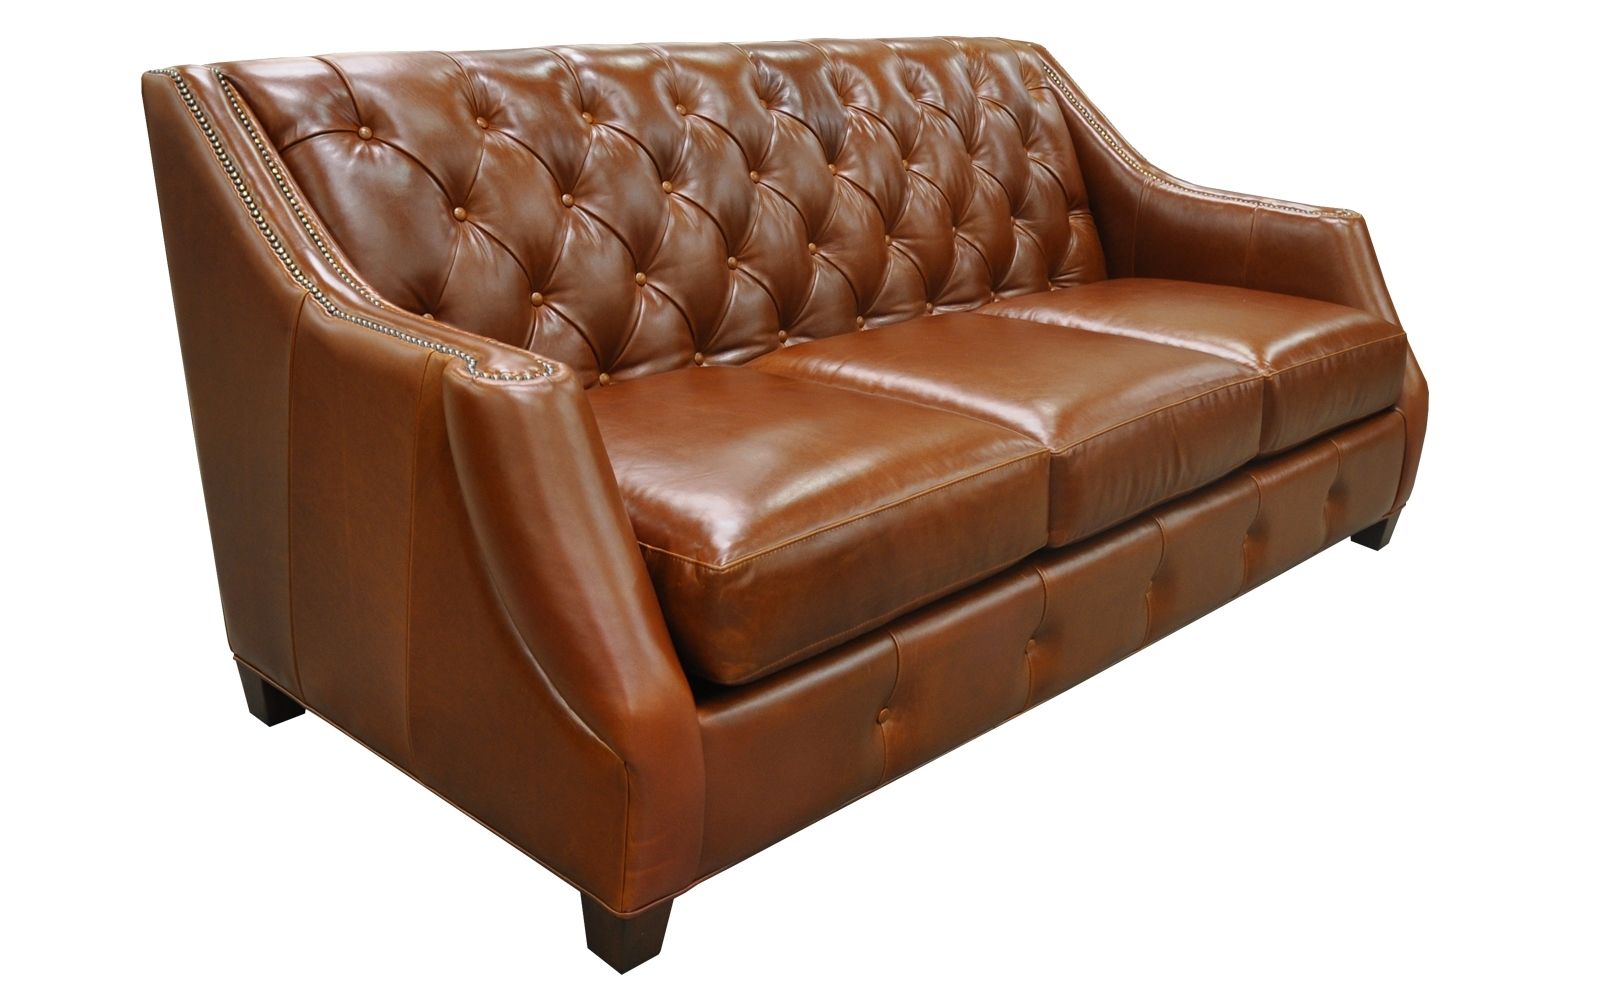 Scarborough Sectional Available – Omnia Leather In Scarborough Sectional Sofas (View 2 of 10)